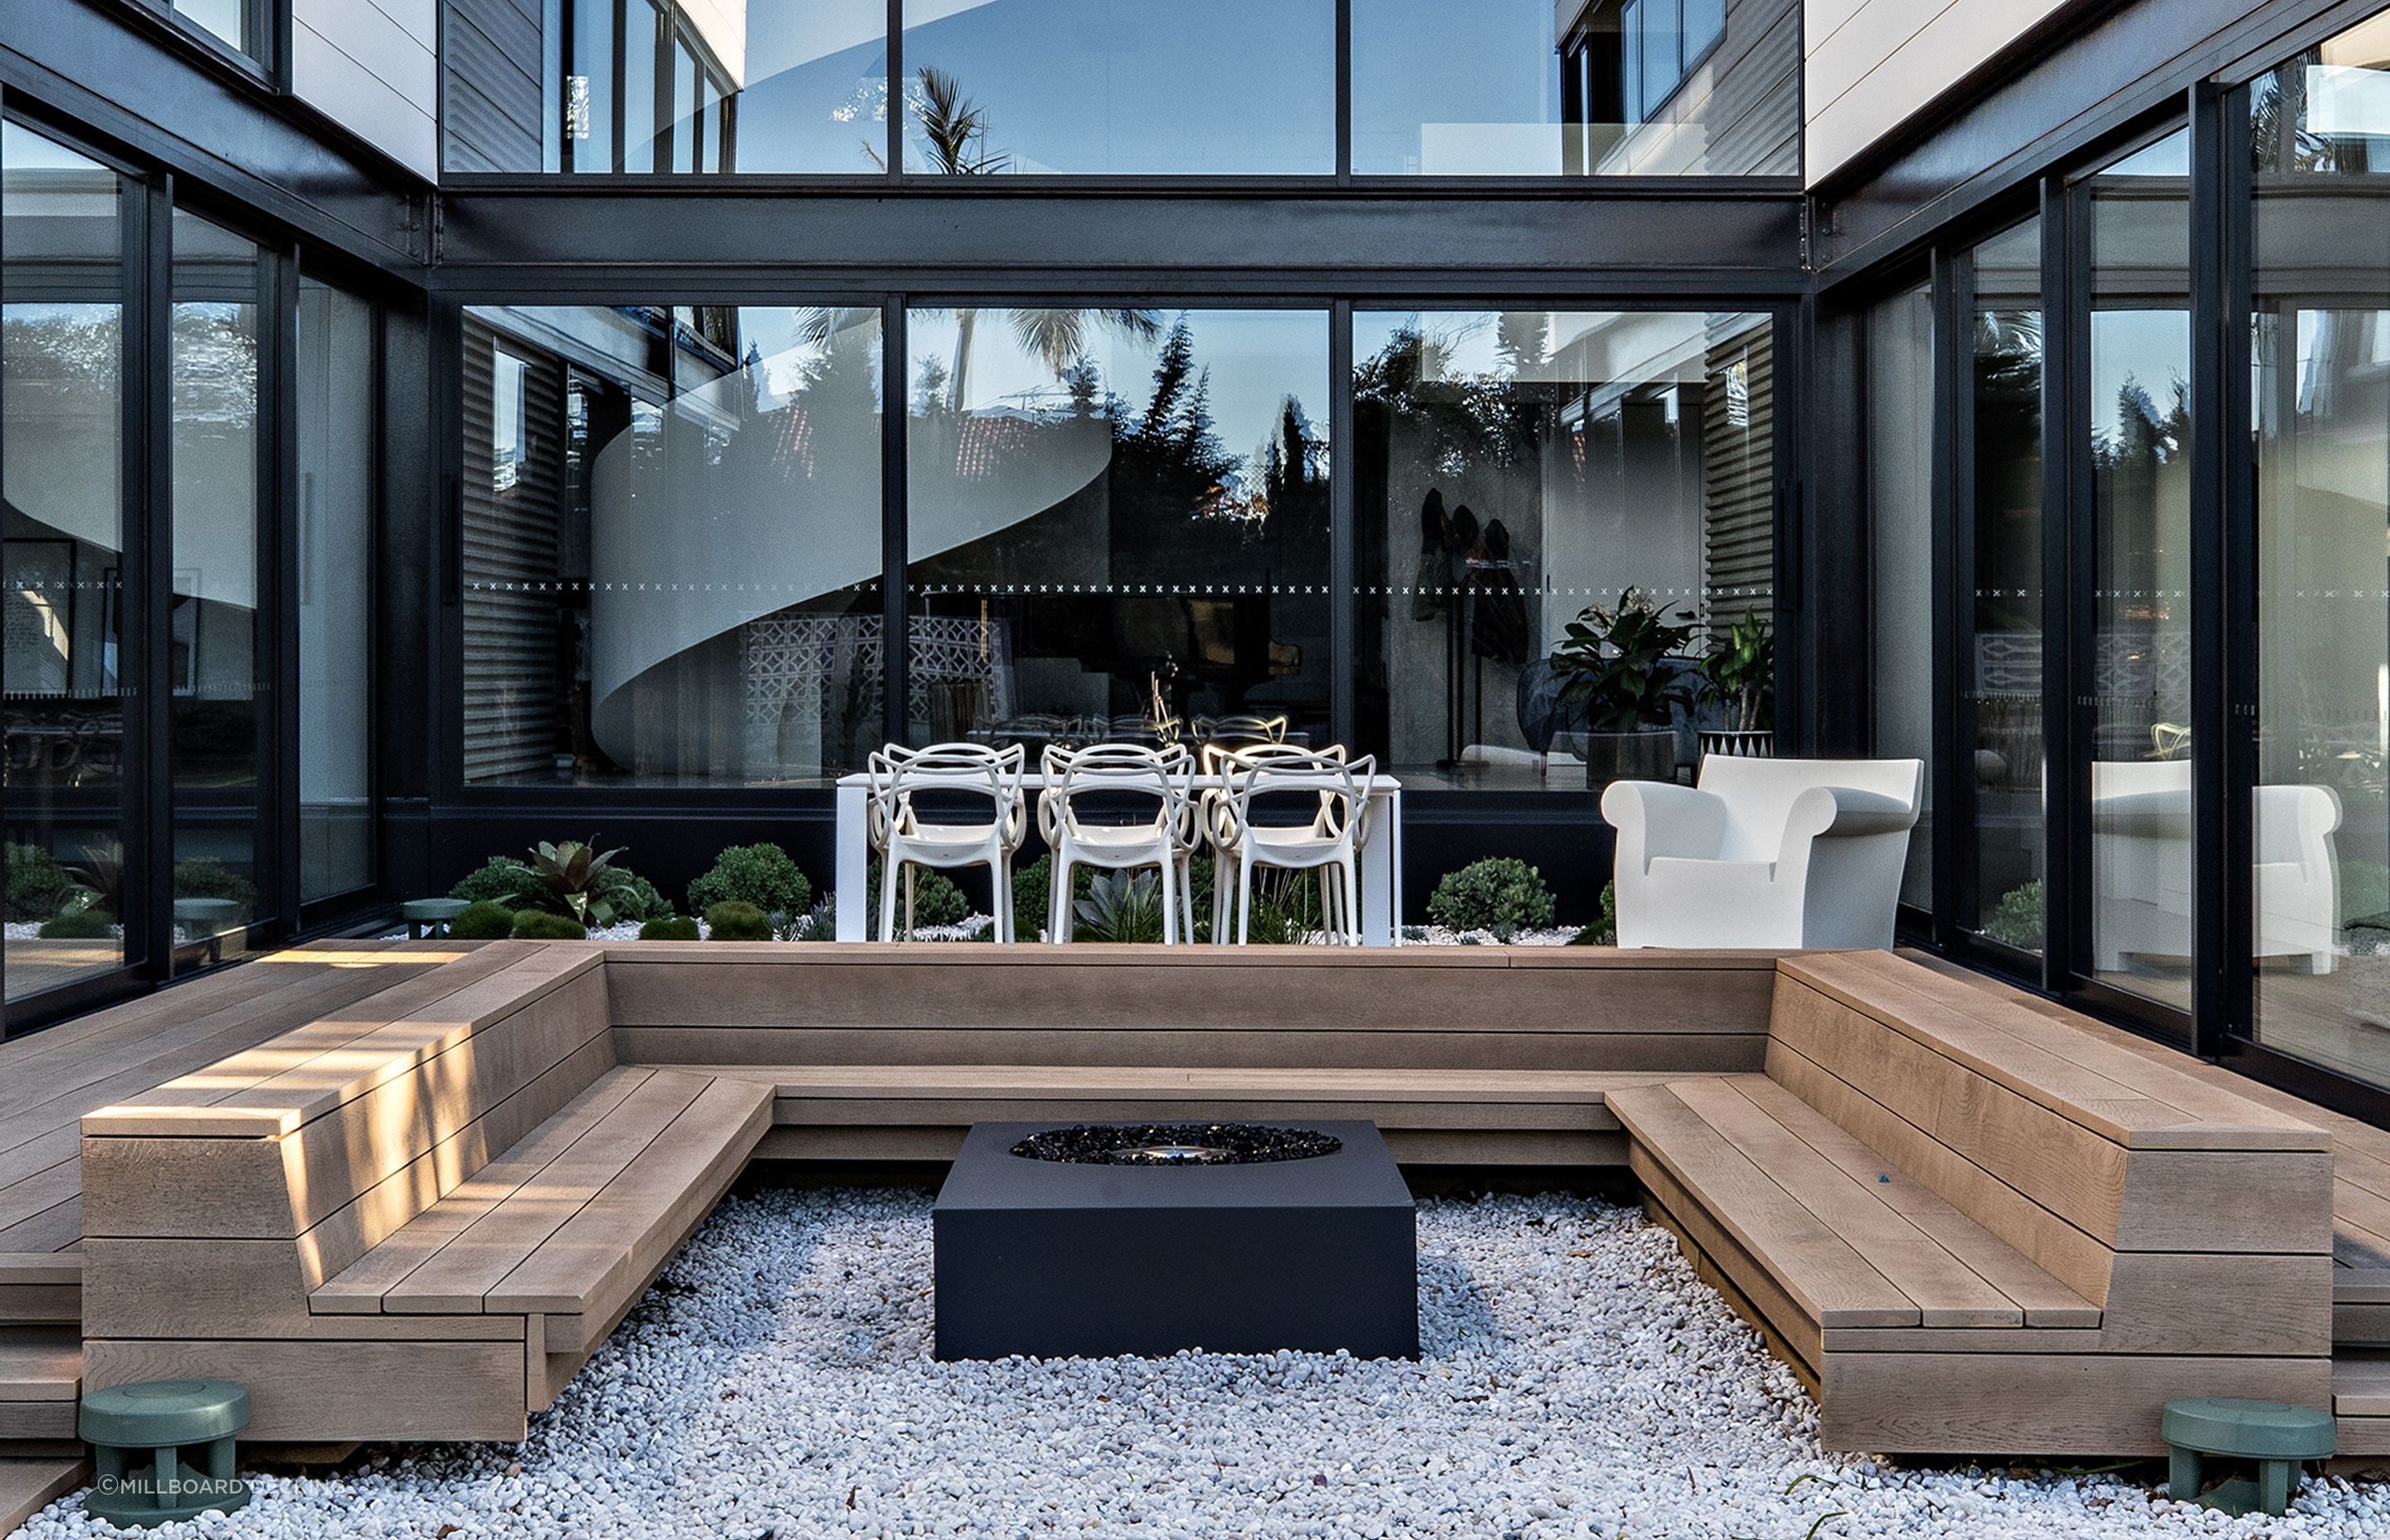 Built-in seating creates a warm entertaining area with Millboard Decking | Photography: The Palm Co. Photography